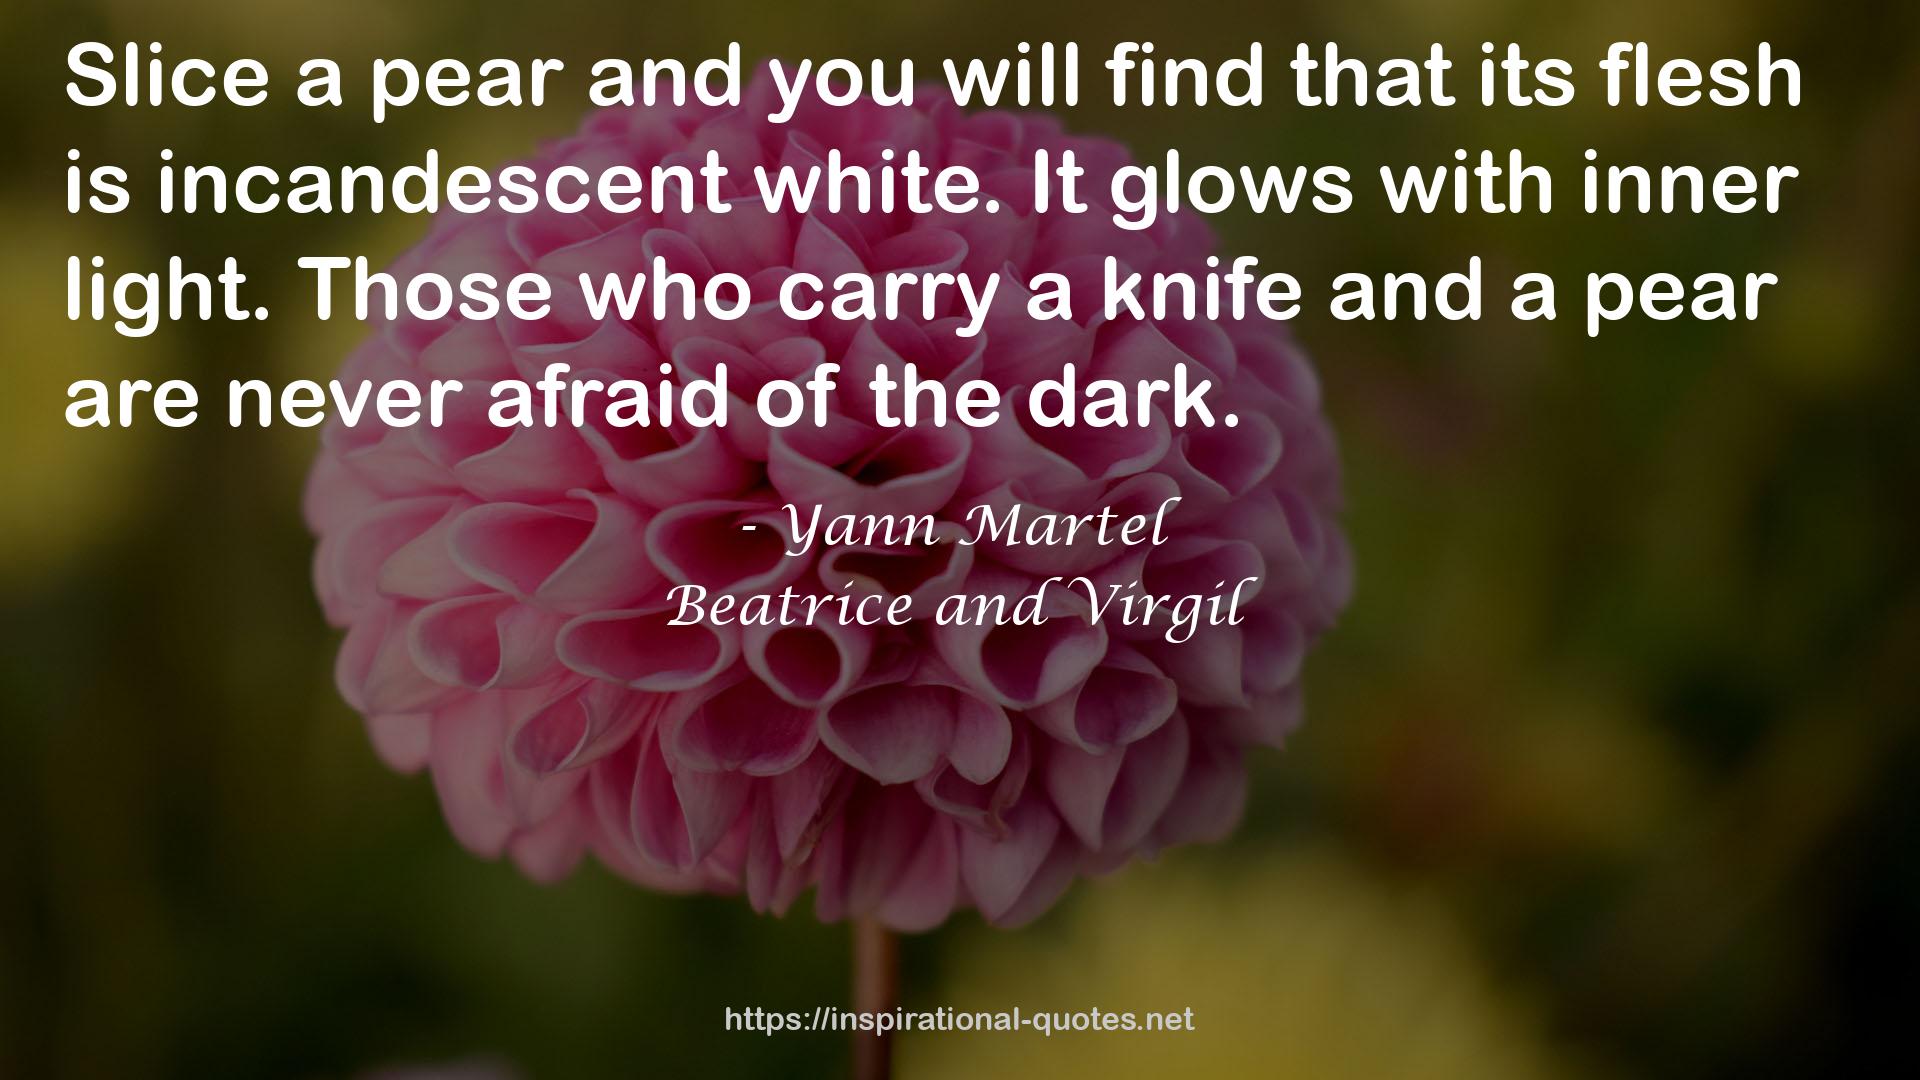 Beatrice and Virgil QUOTES